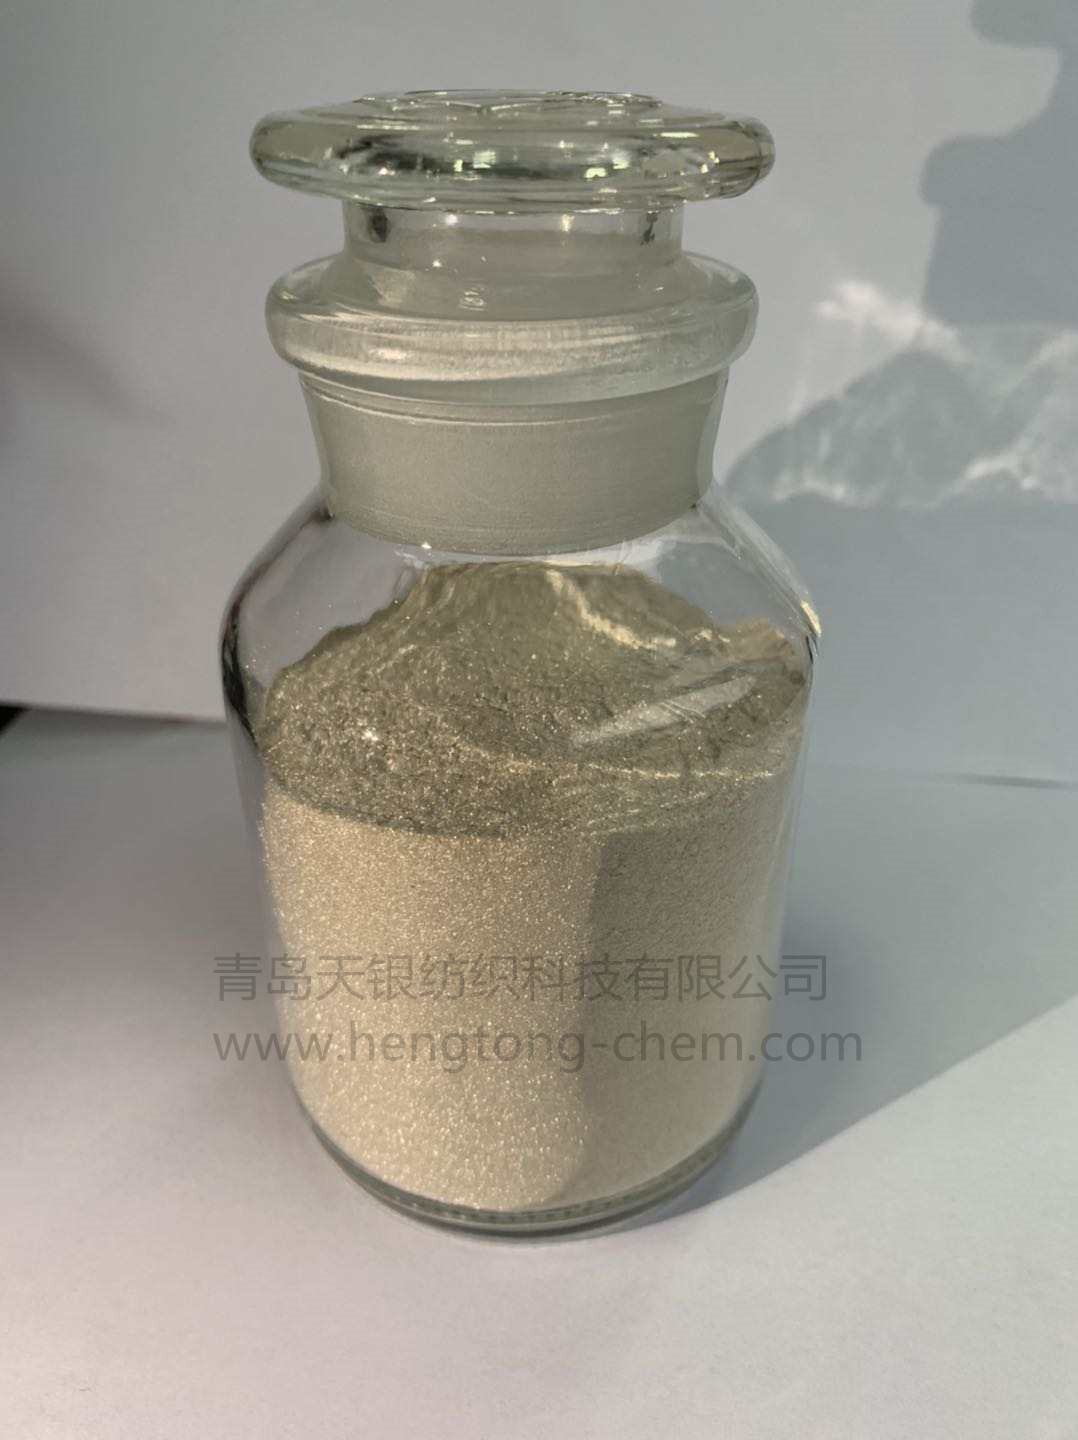 Silver plated carbon powder